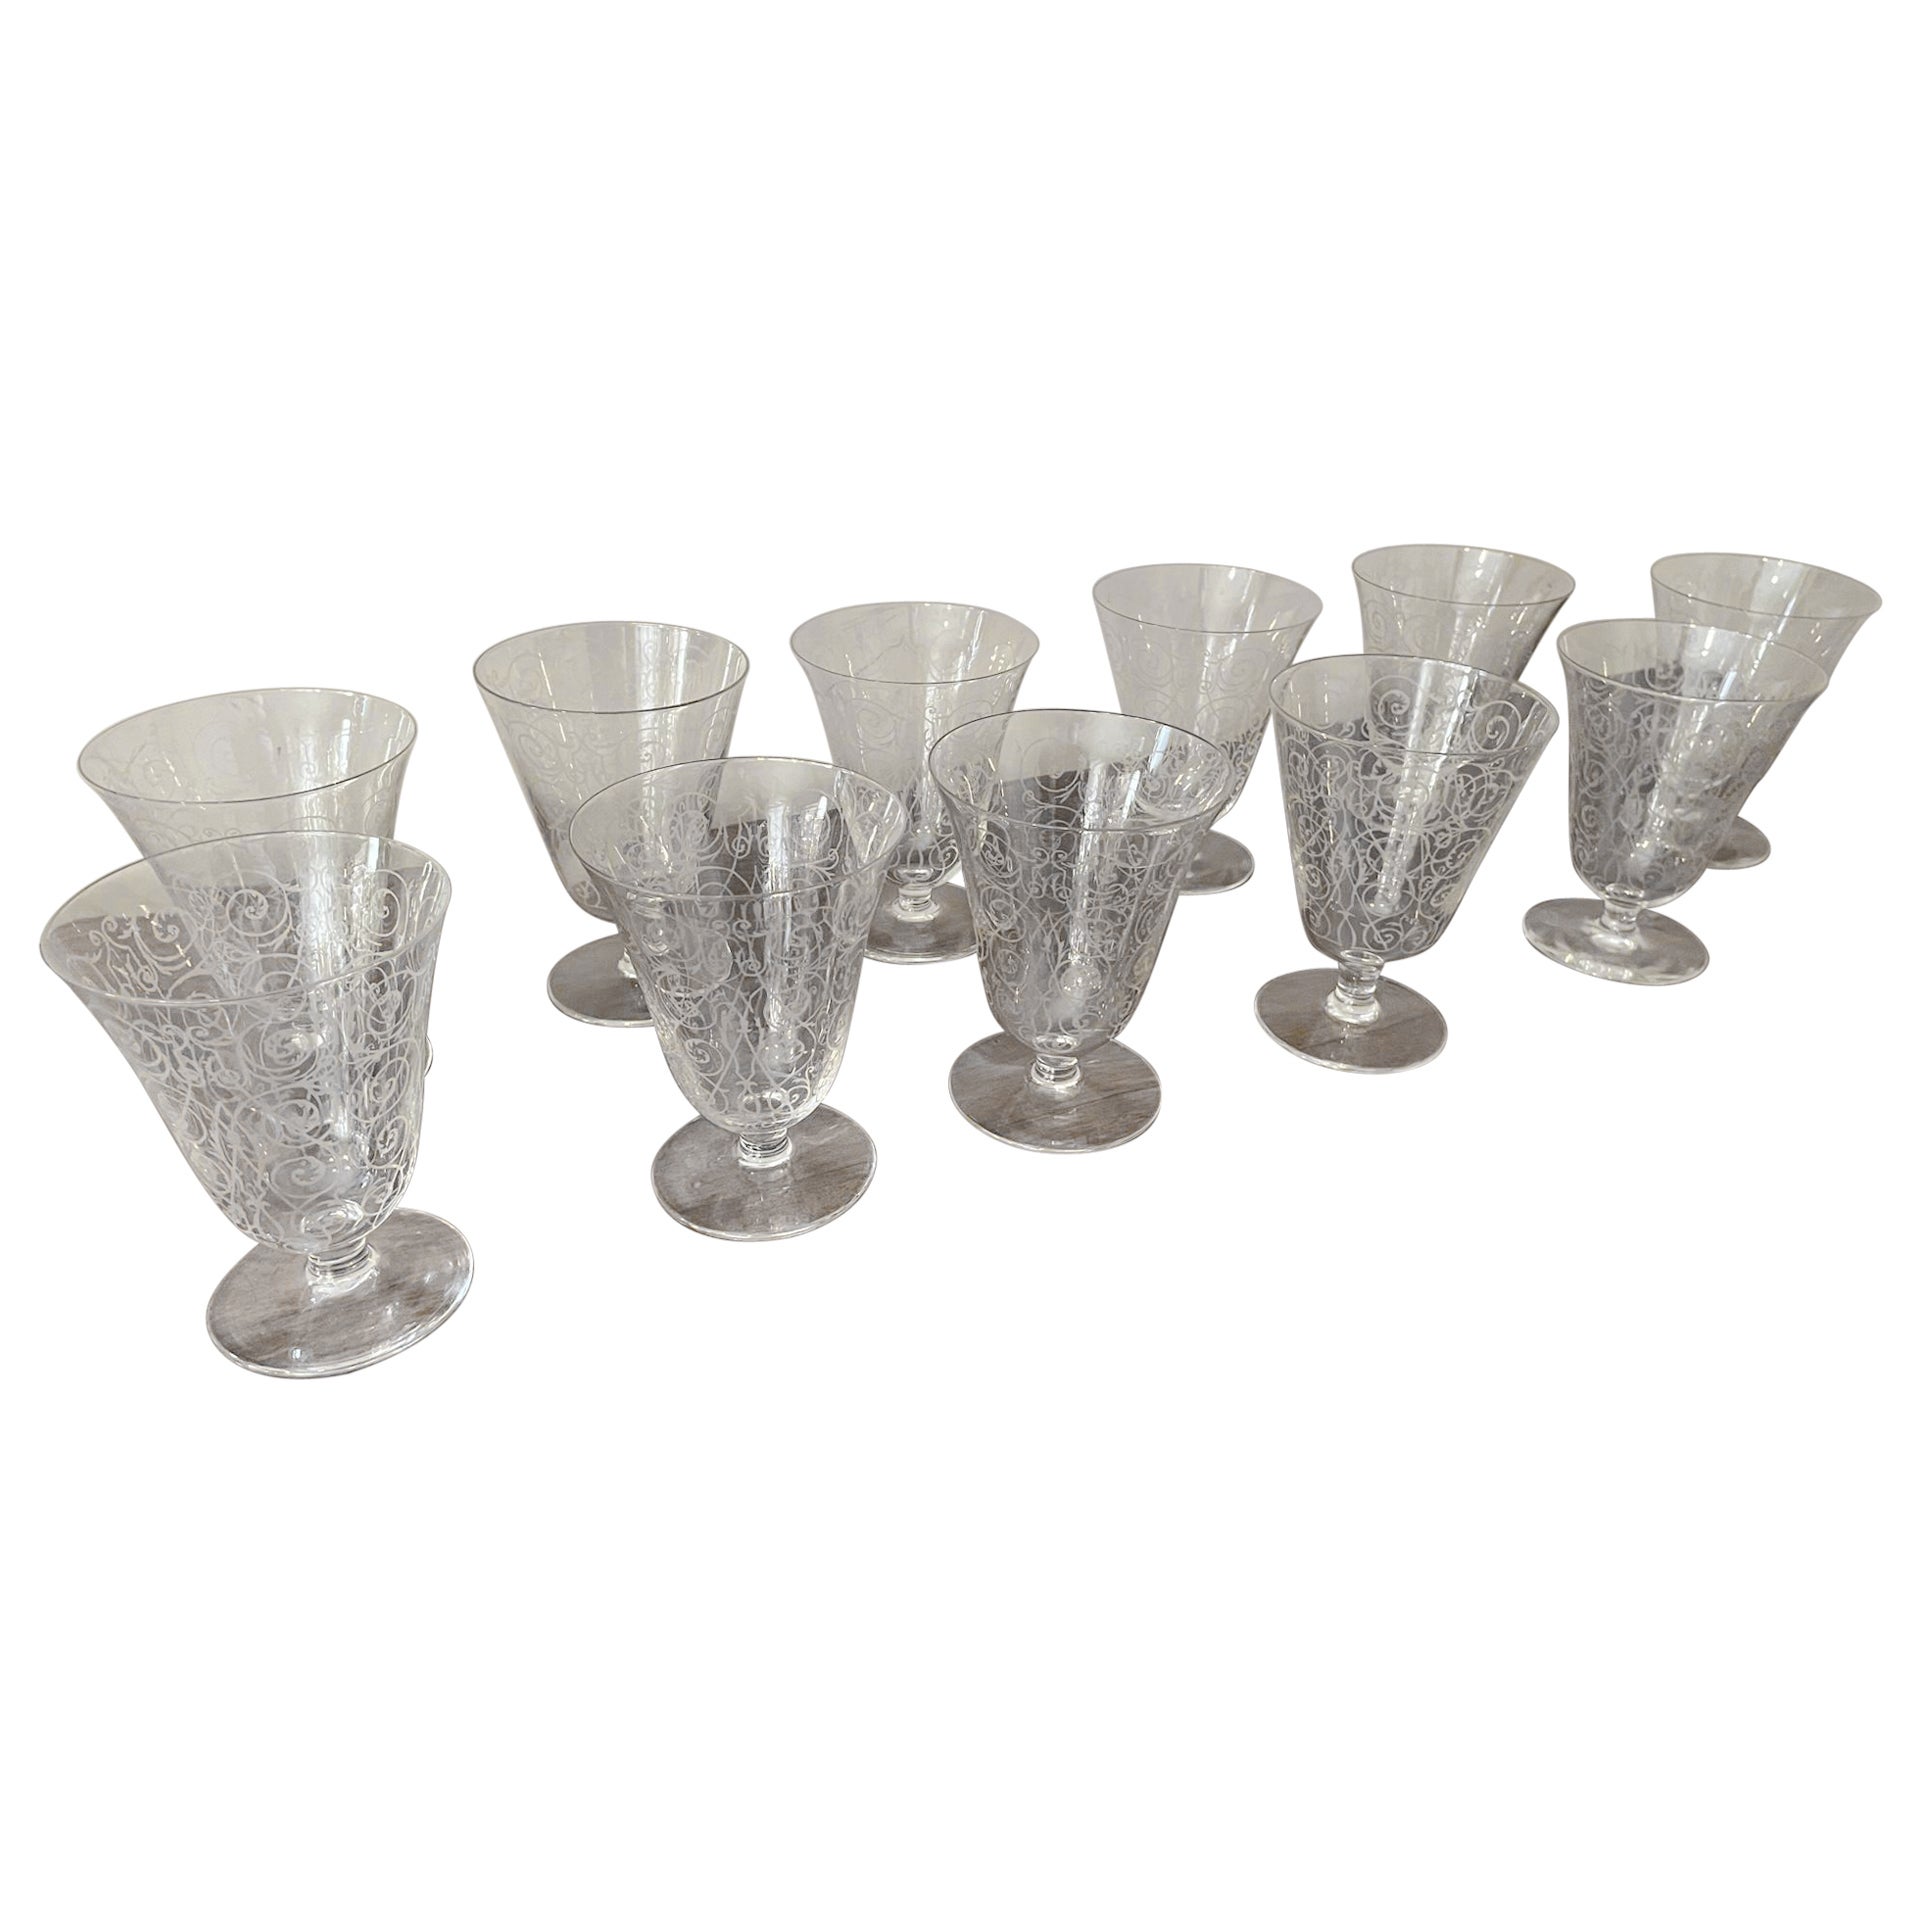 20th Century French, Set of 11 Wine Glasses in the Taste of Baccarat, 1930s